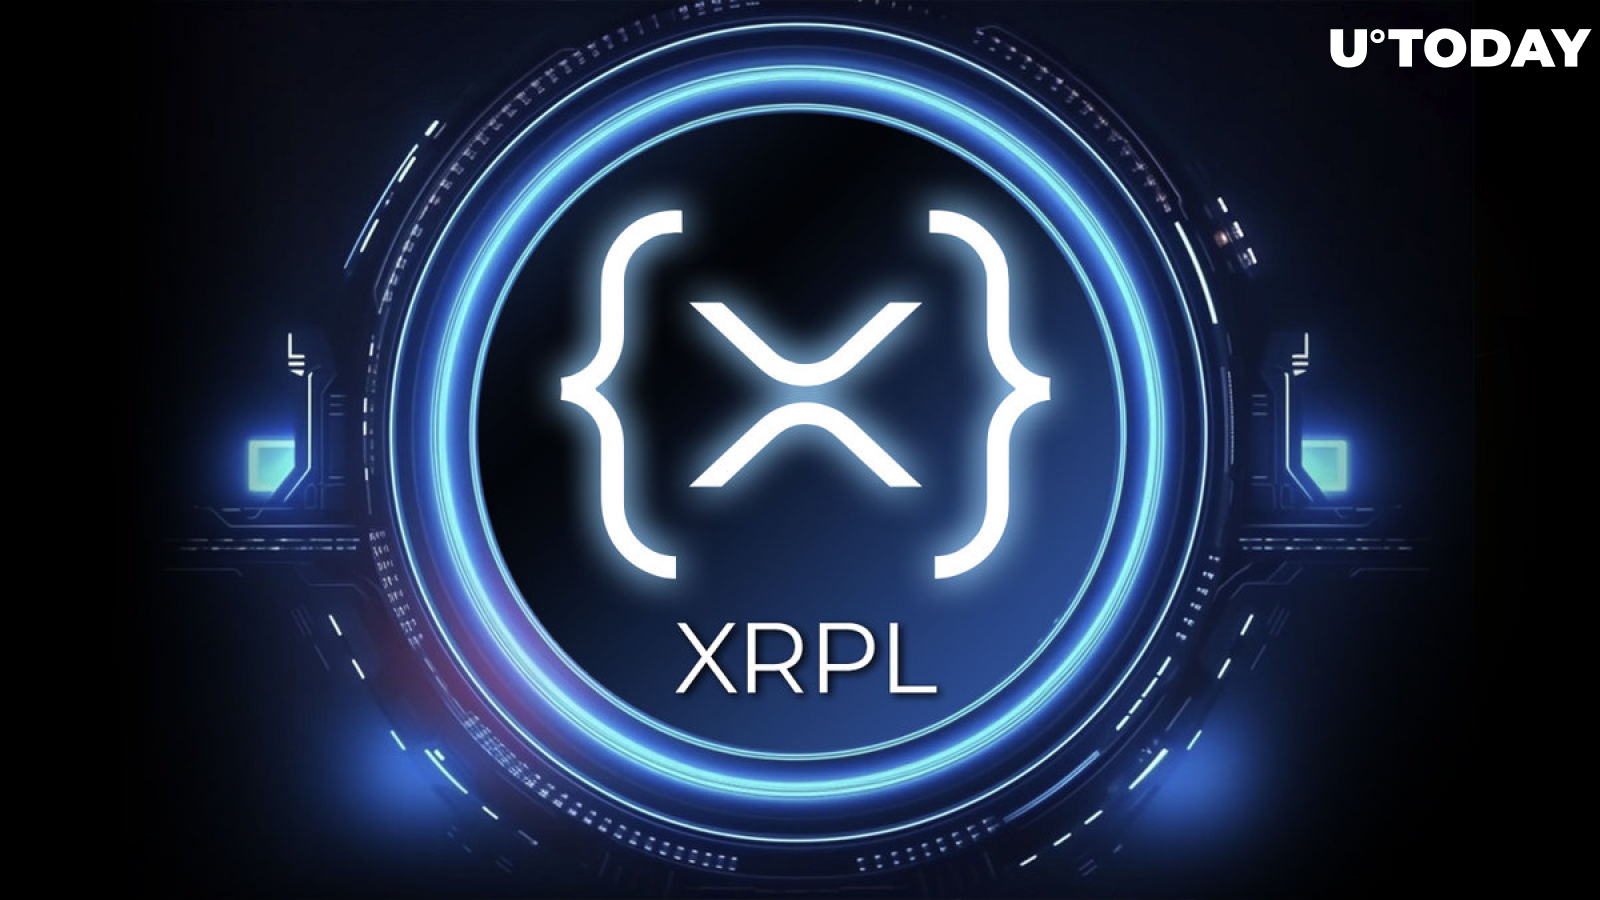 XRP Ledger (XRPL) Transactions in Q1 Jump 108%, but With Catch